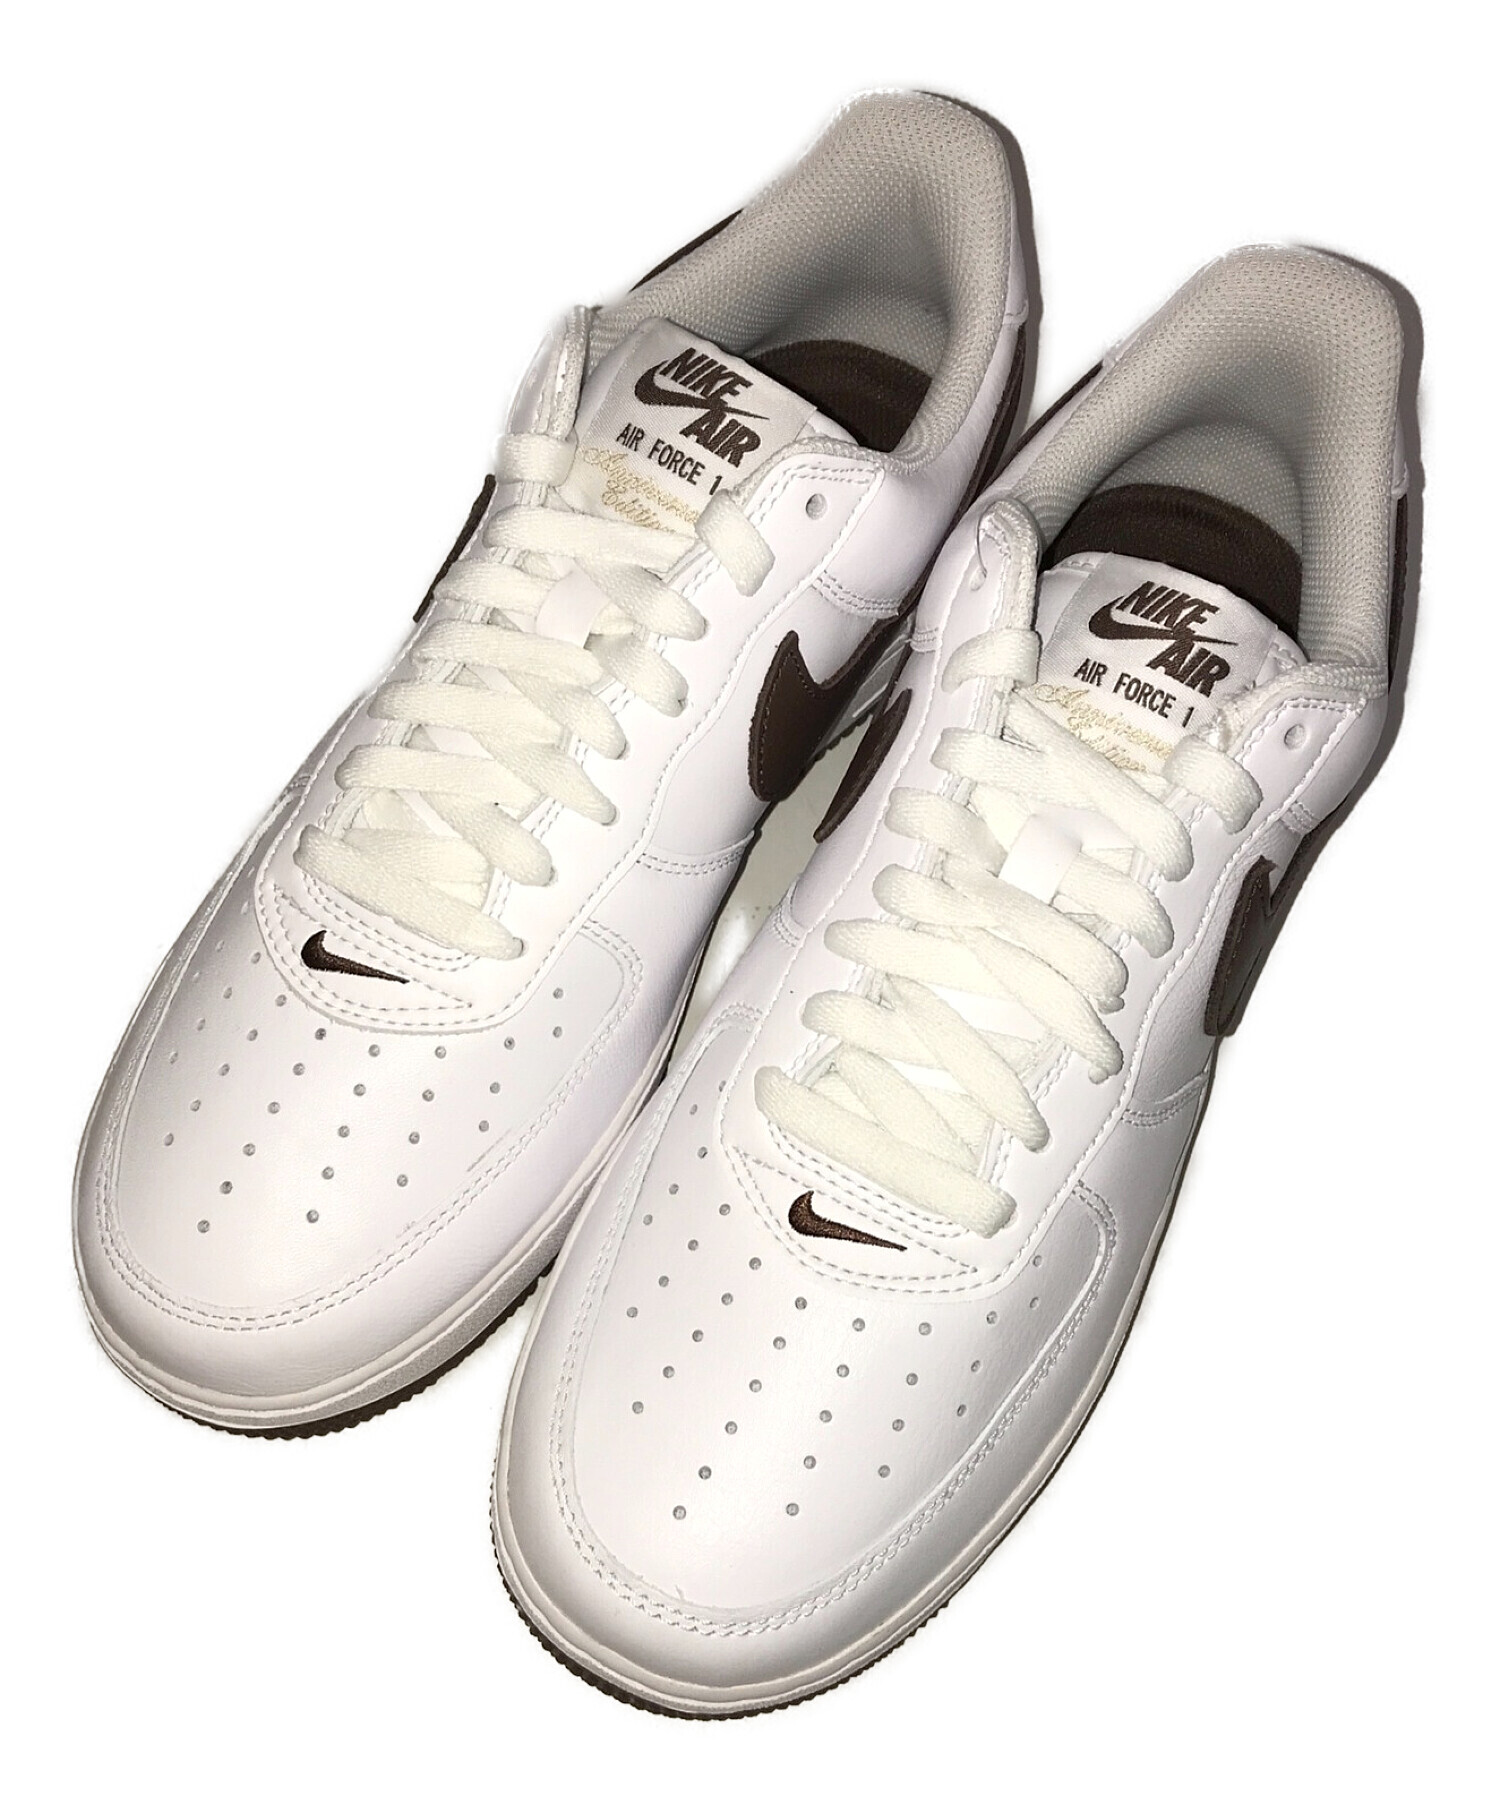 NIKE (ナイキ) AIR FORCE1 LOW RETRO 'Color of the Month' ホワイト×ブラウン/チョコレート  サイズ:27.5cm 未使用品